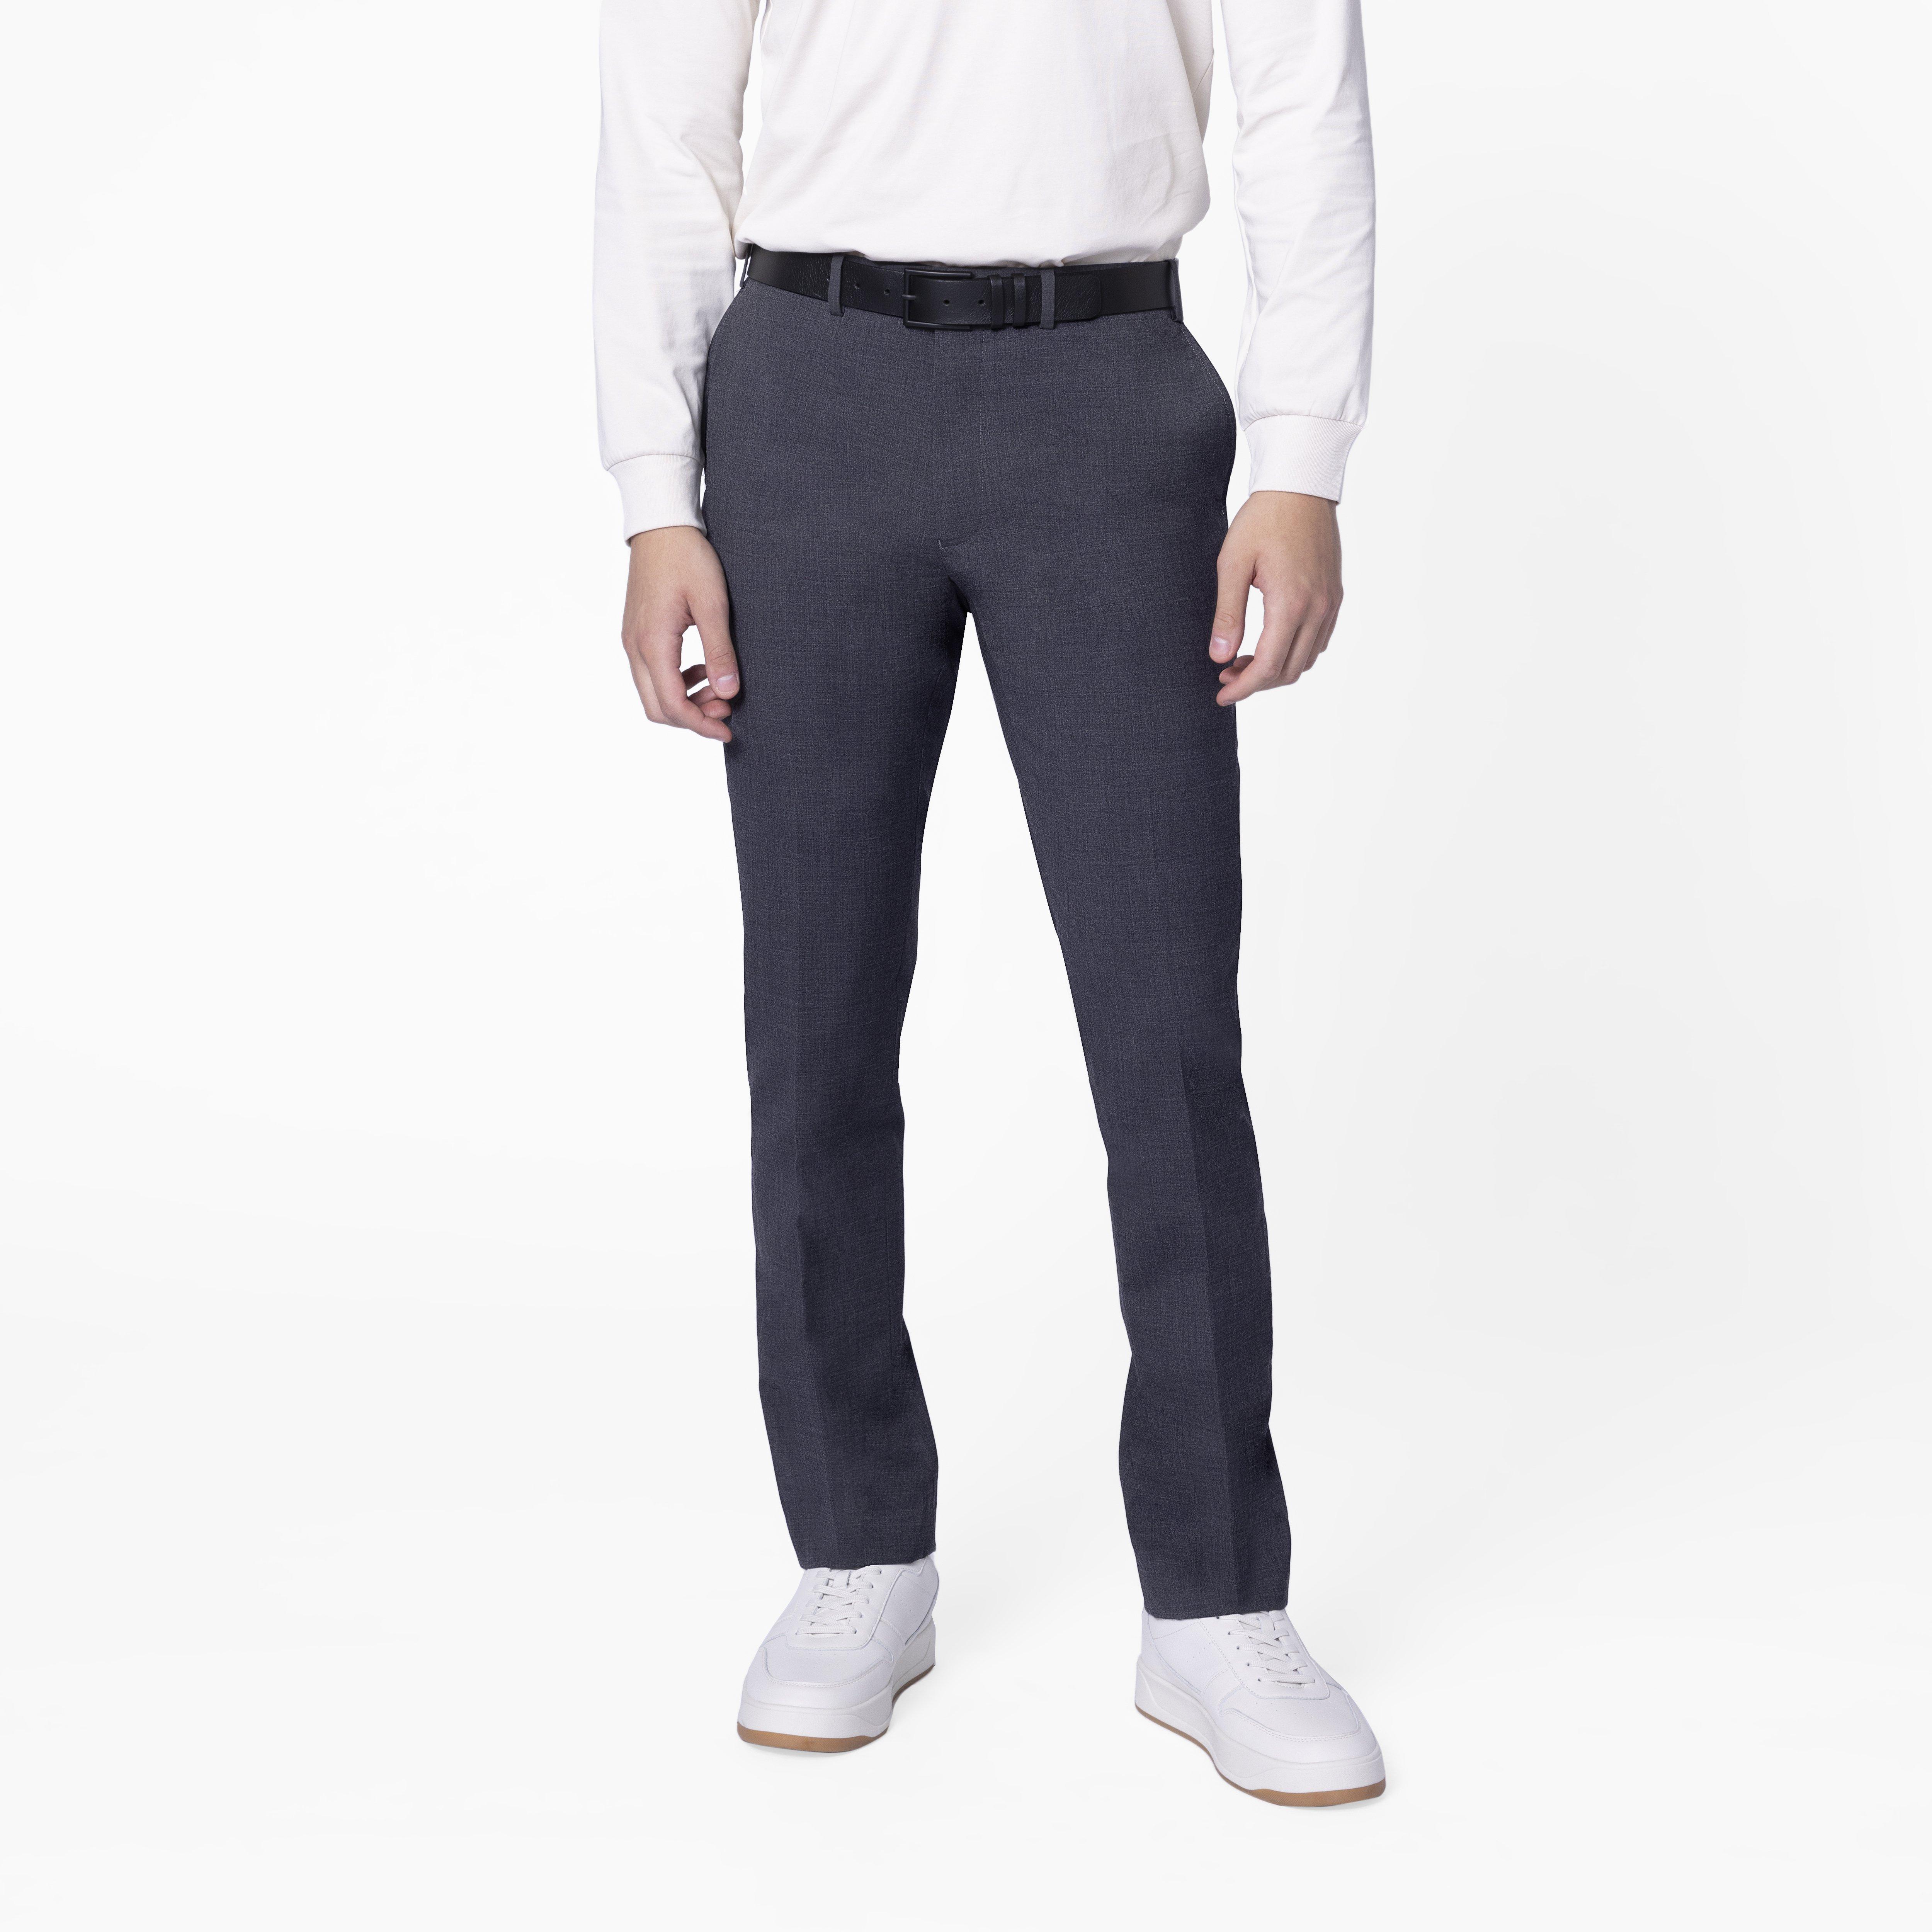 Custom Suits Made For You - Howell Wool Stretch Light Gray Suit | INDOCHINO